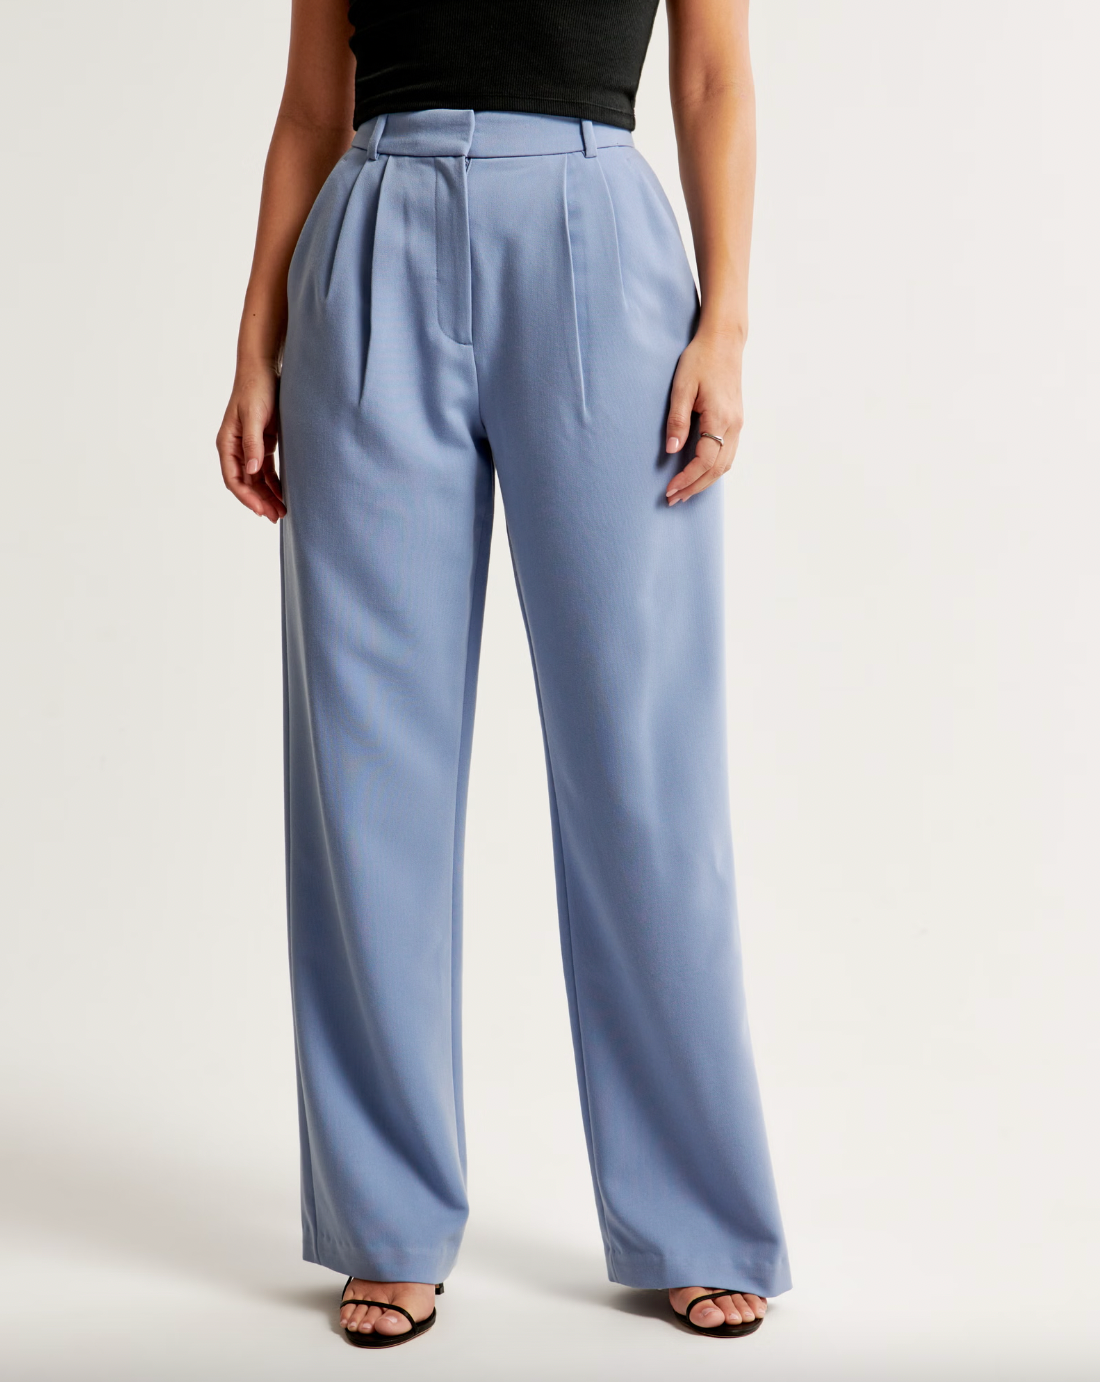 Abercrombie & Fitch + Curve Love A&F Sloane Tailored Pant